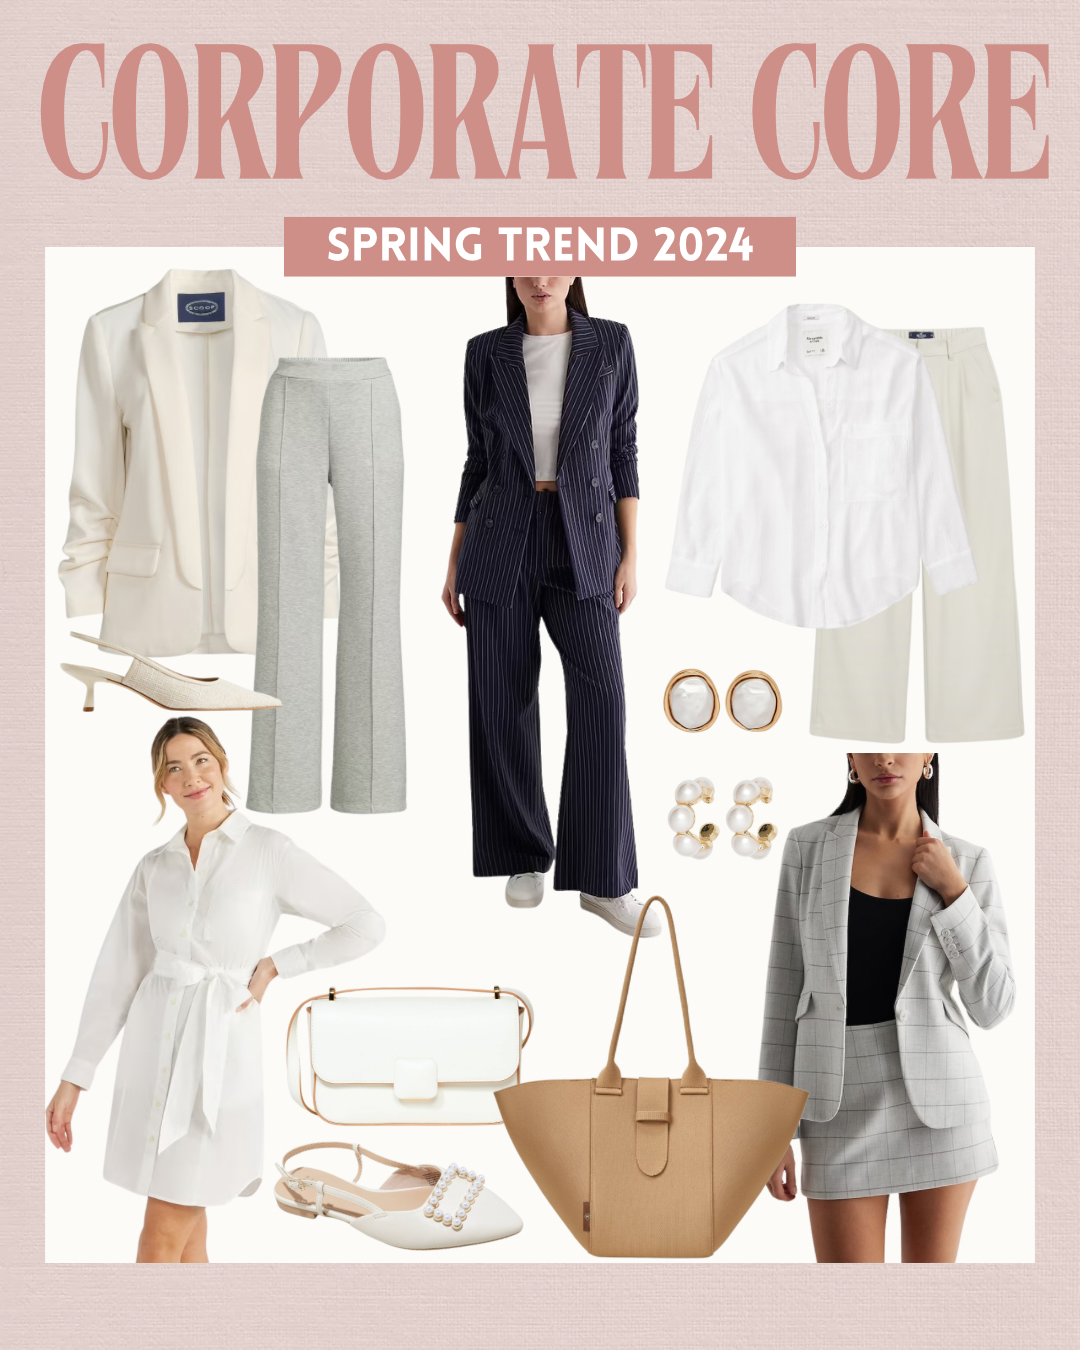 Corporate Core Aesthetic for Spring 2024